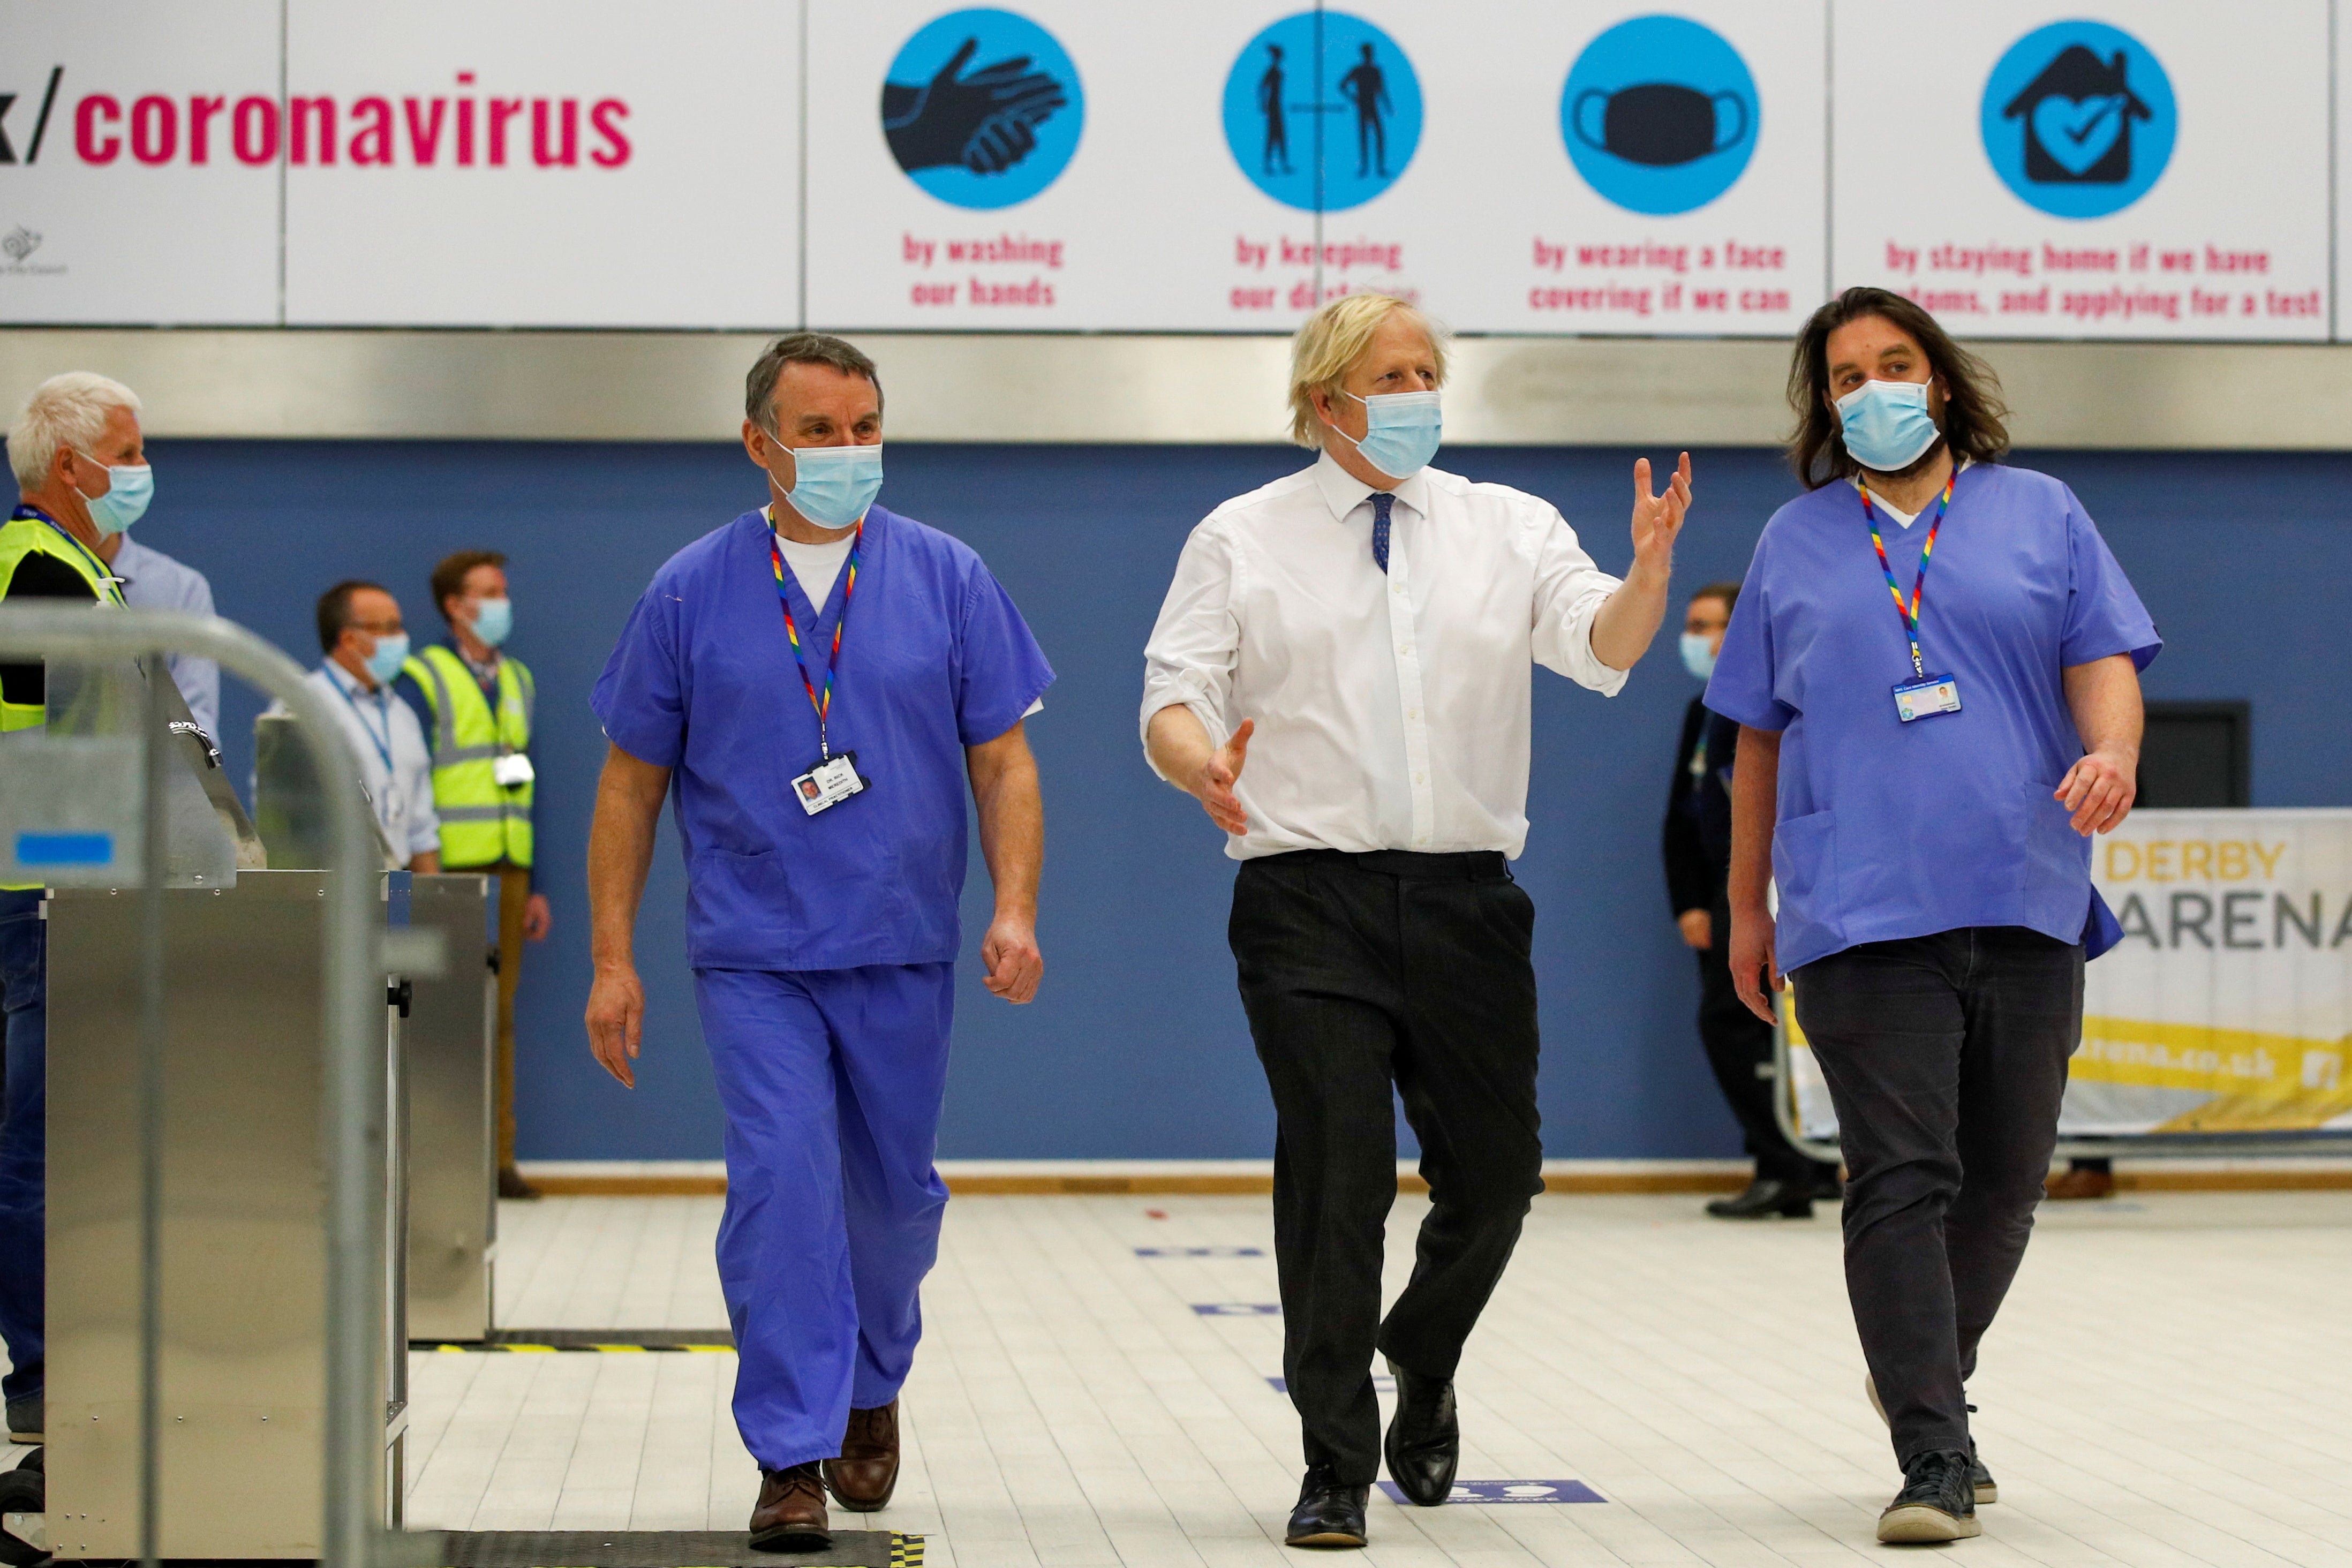 Boris Johnson visits a temporary Covid-19 vaccination centre set up at Derby Arena in Derby